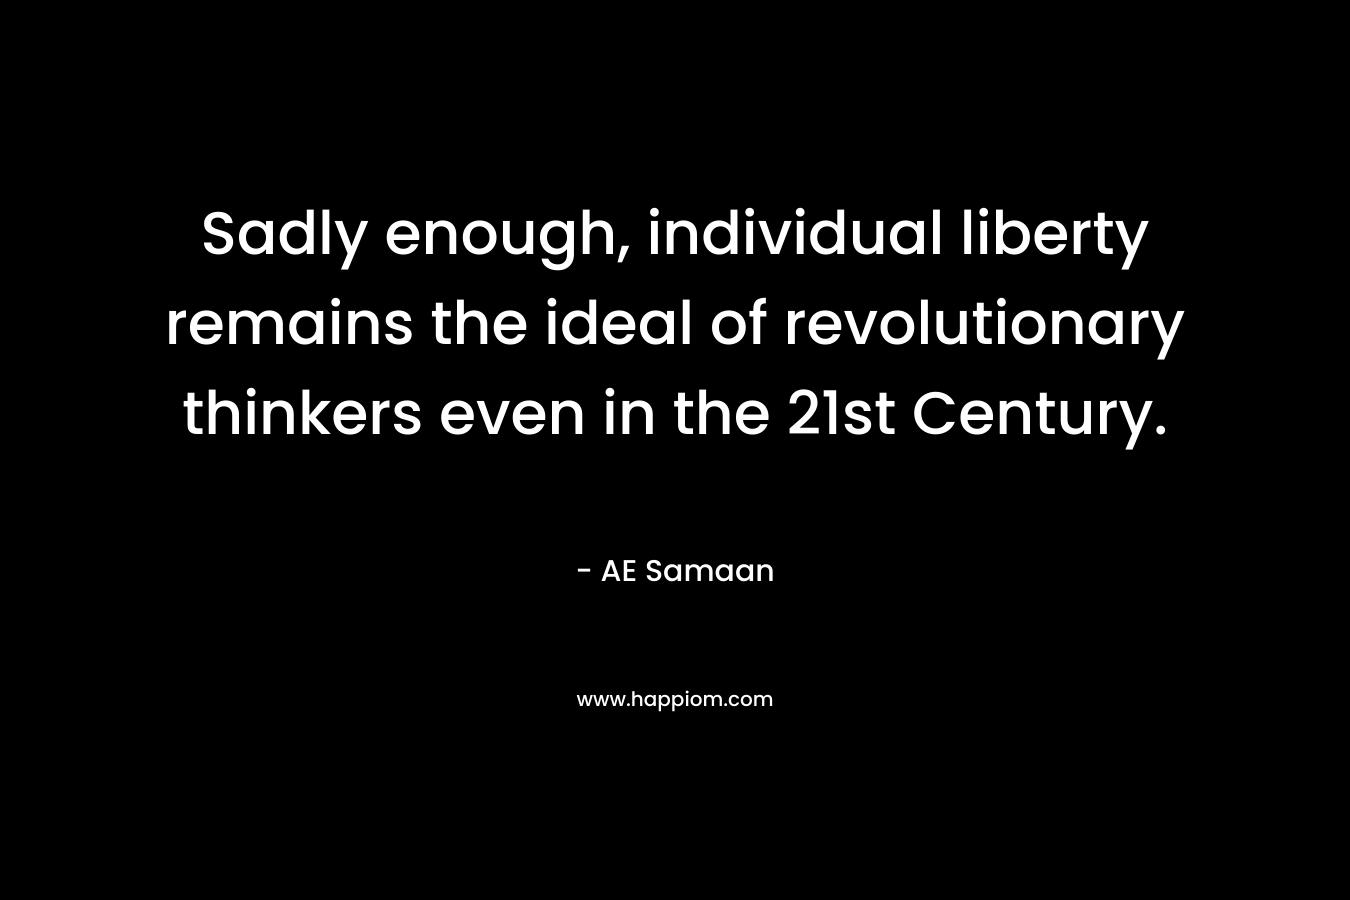 Sadly enough, individual liberty remains the ideal of revolutionary thinkers even in the 21st Century.